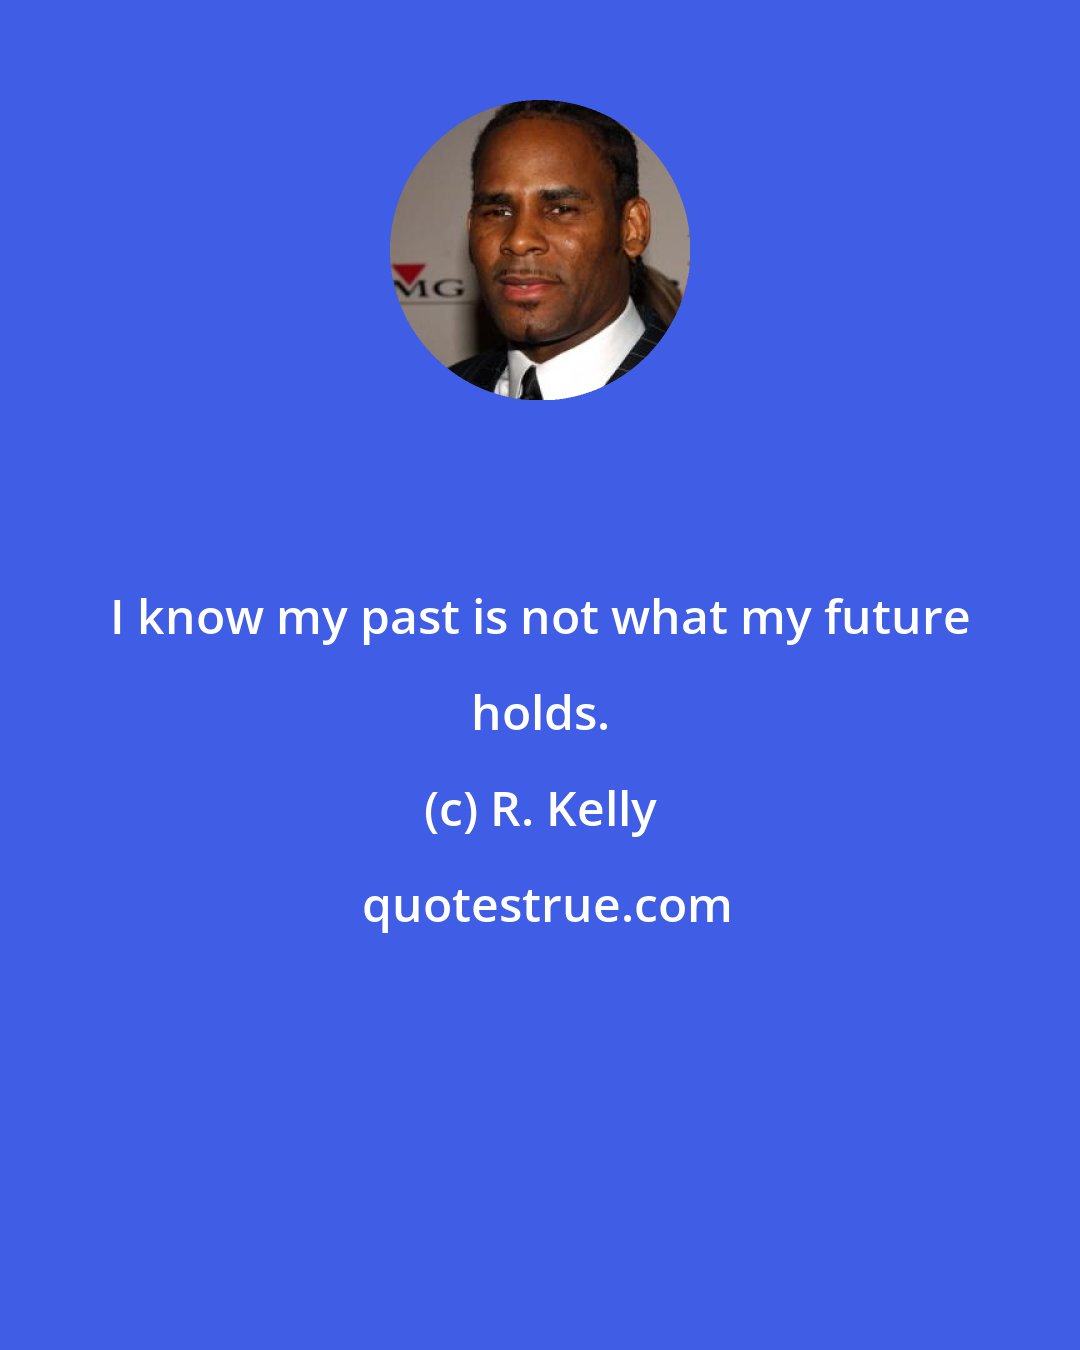 R. Kelly: I know my past is not what my future holds.